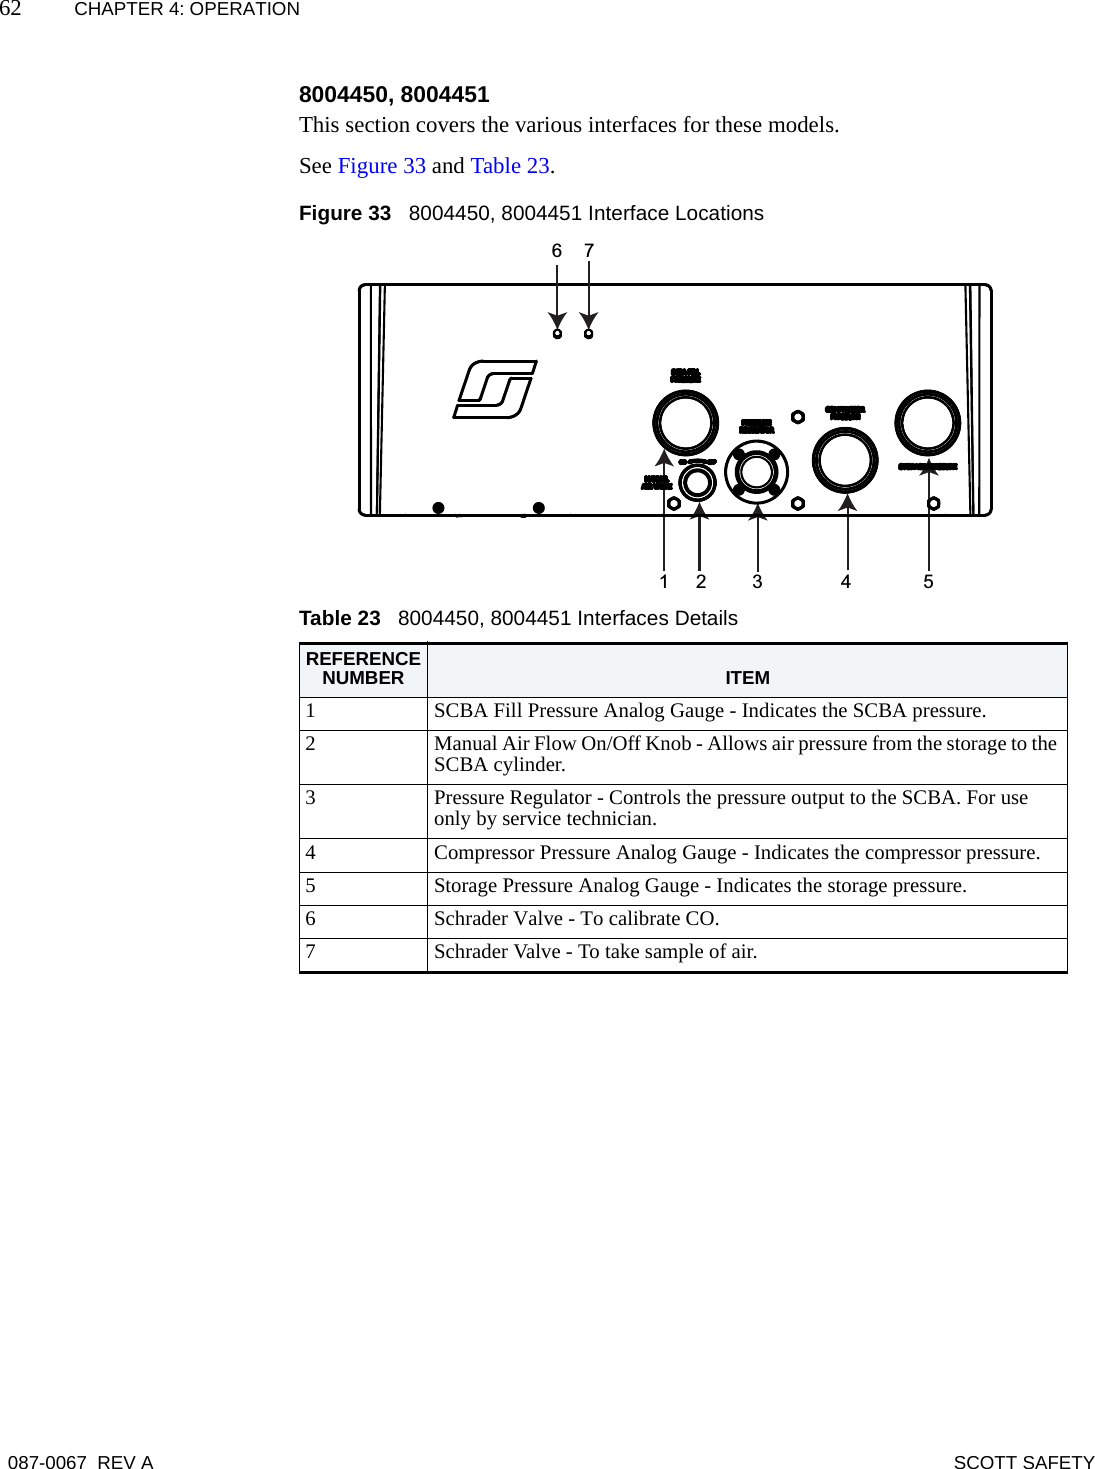 62 CHAPTER 4: OPERATION087-0067 REV A SCOTT SAFETY8004450, 8004451This section covers the various interfaces for these models. See Figure 33 and Table 23. Figure 33   8004450, 8004451 Interface LocationsTable 23   8004450, 8004451 Interfaces DetailsREFERENCE NUMBER ITEM1SCBA Fill Pressure Analog Gauge - Indicates the SCBA pressure. 2Manual Air Flow On/Off Knob - Allows air pressure from the storage to the SCBA cylinder. 3Pressure Regulator - Controls the pressure output to the SCBA. For use only by service technician. 4Compressor Pressure Analog Gauge - Indicates the compressor pressure.5Storage Pressure Analog Gauge - Indicates the storage pressure. 6Schrader Valve - To calibrate CO.7Schrader Valve - To take sample of air. 12 3456 7